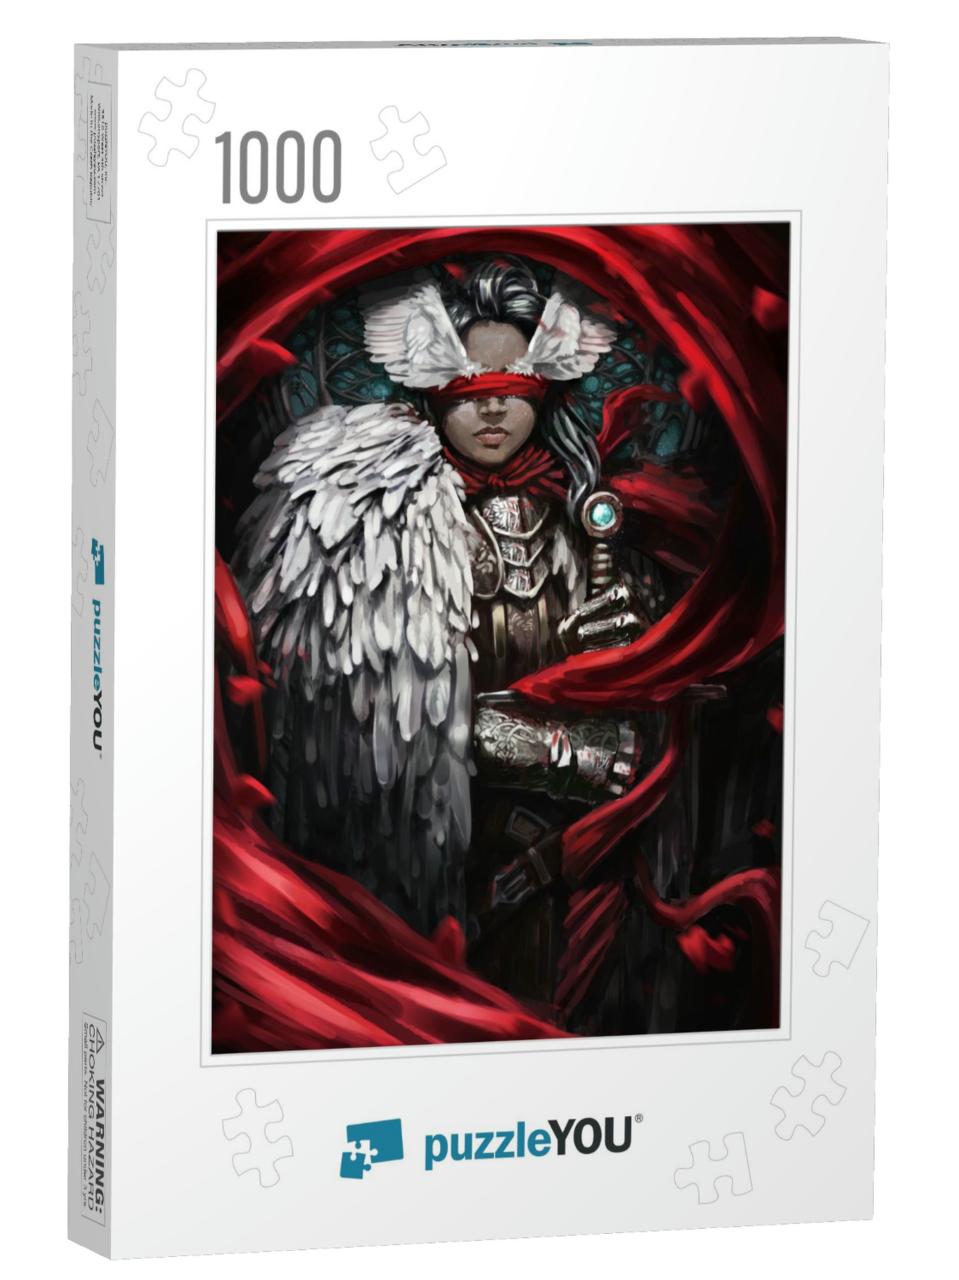 Young Knight Girl, She Has a Cape Made of Feathers Instea... Jigsaw Puzzle with 1000 pieces